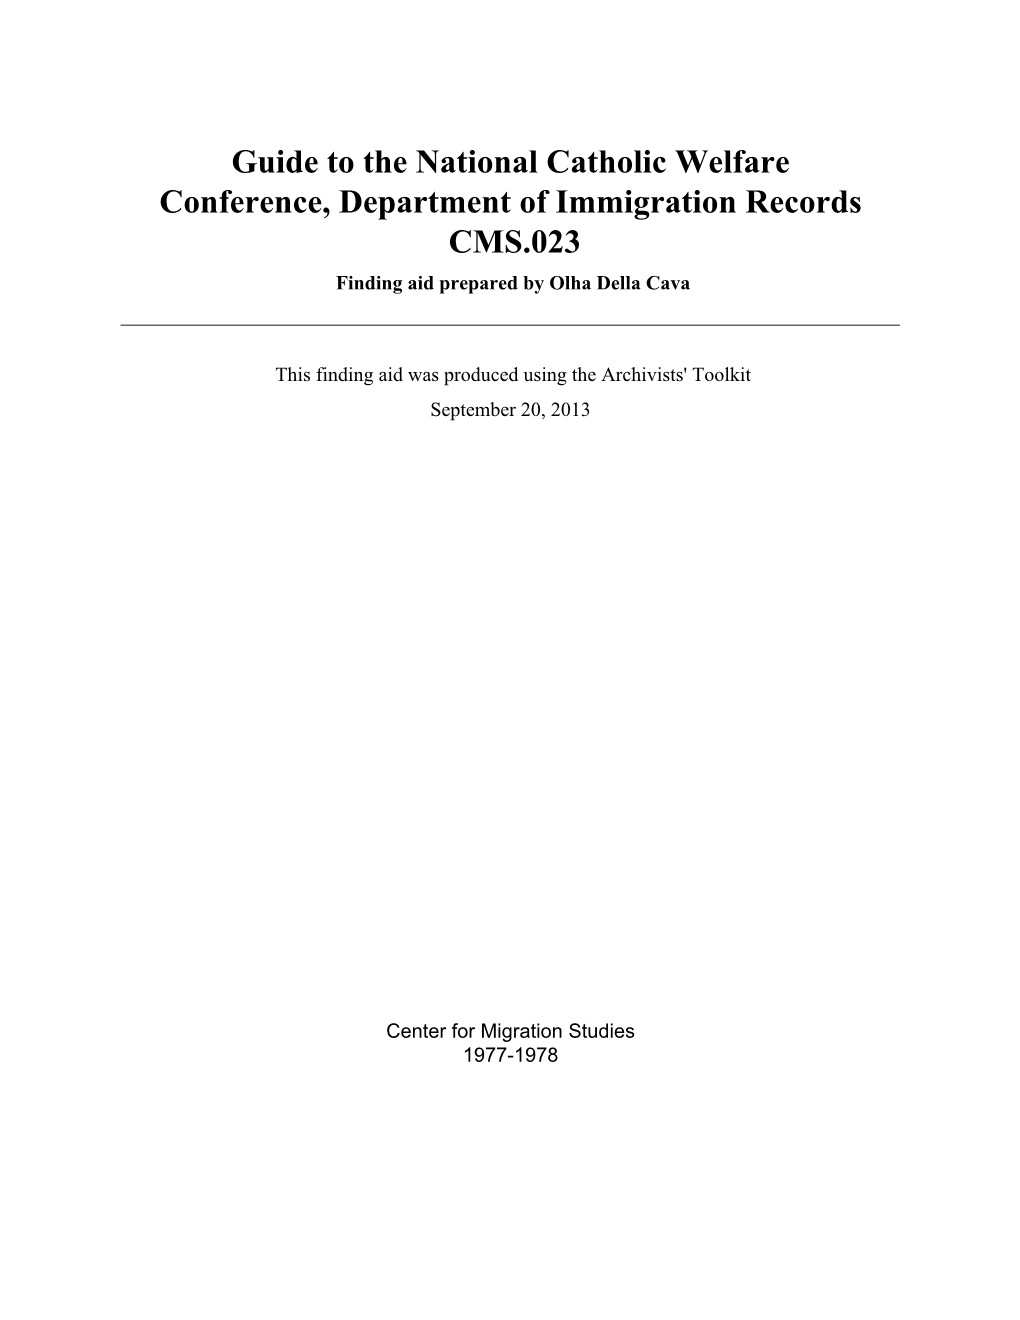 Guide to the National Catholic Welfare Conference, Department of Immigration Records CMS.023 Finding Aid Prepared by Olha Della Cava